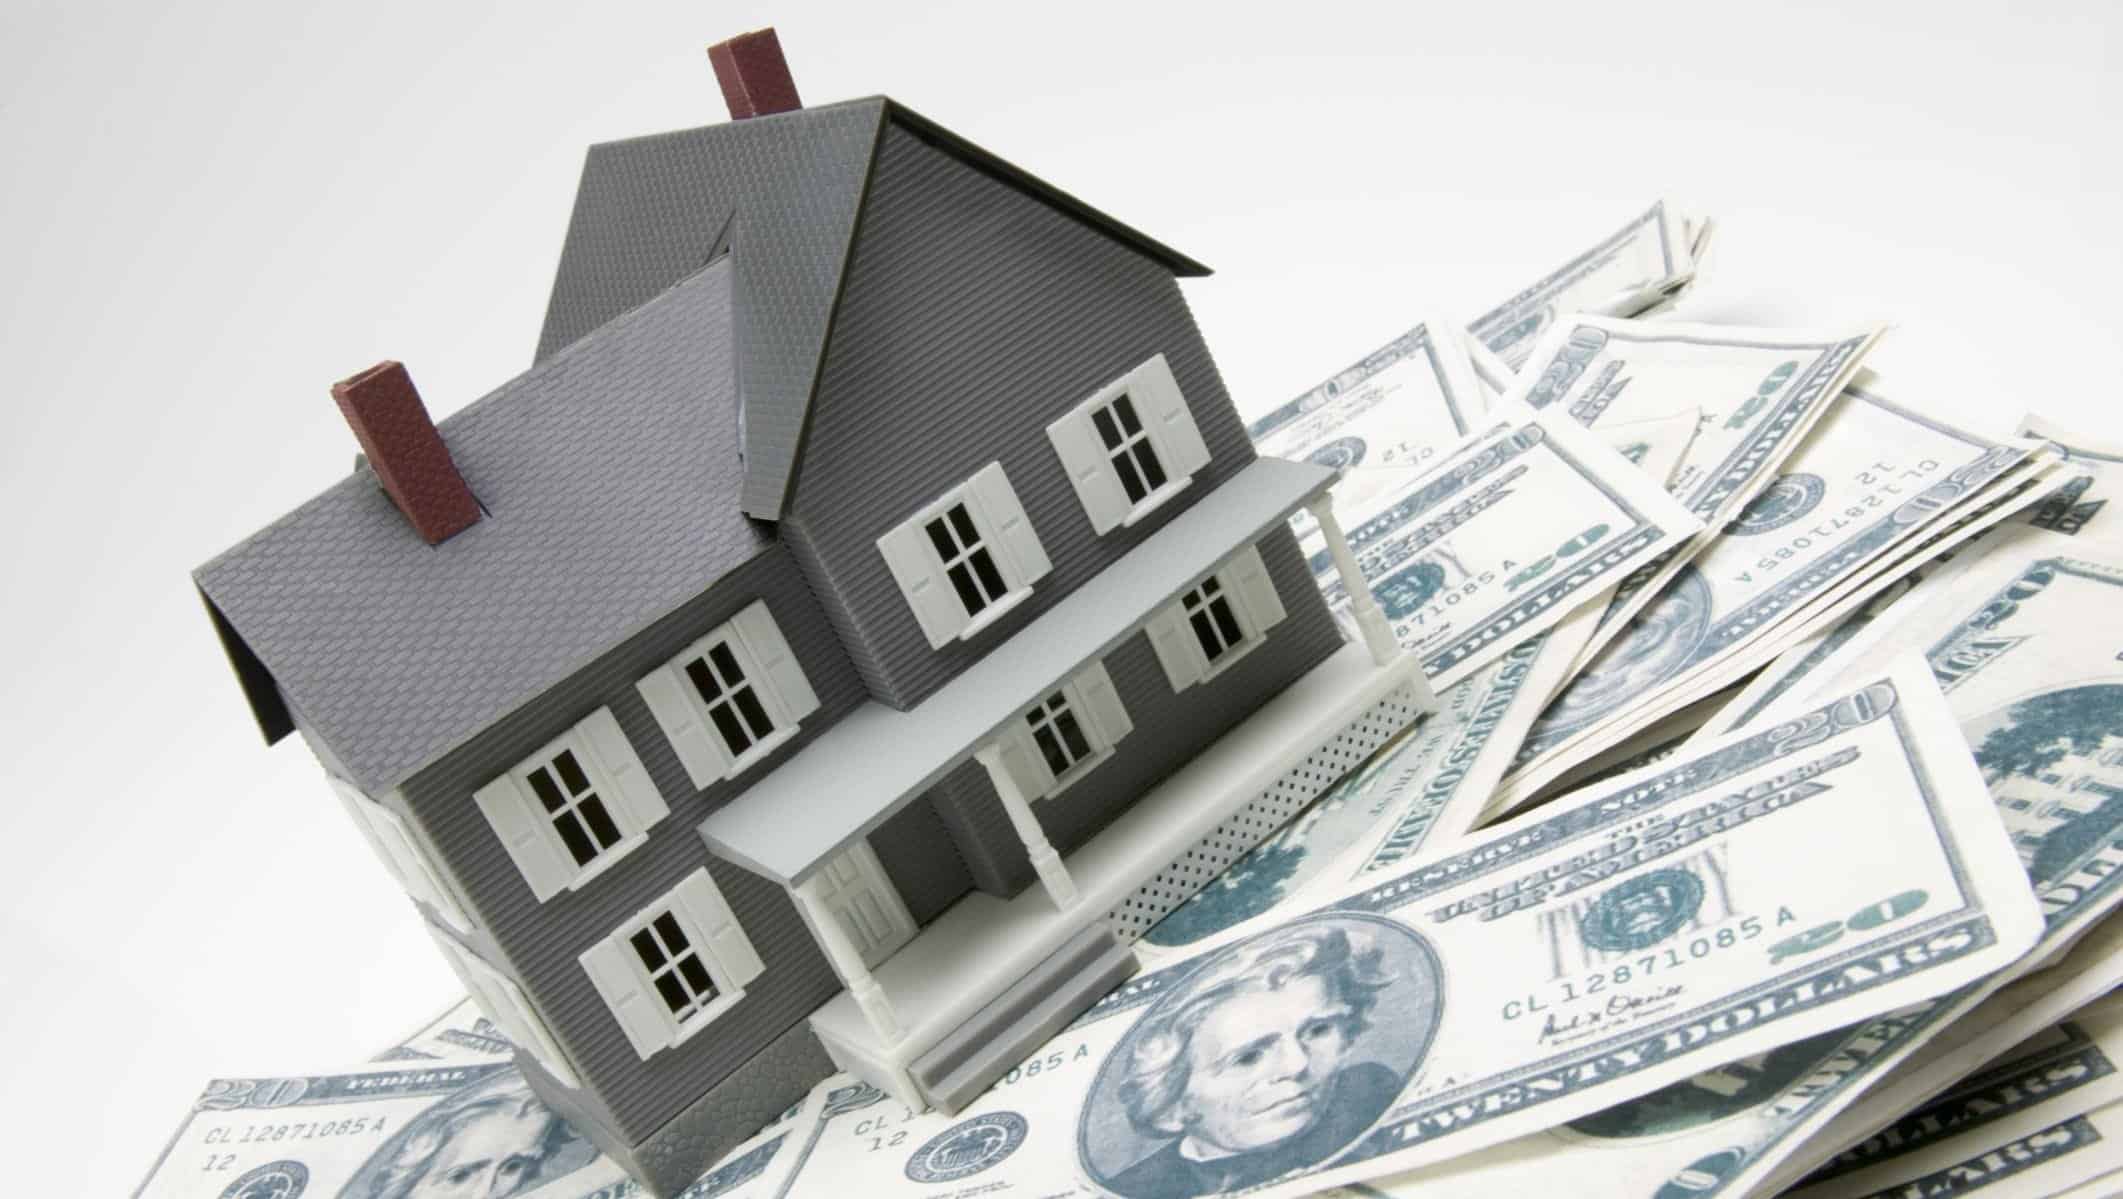 Get Cash For House Dallas? – A ‘We Buy Houses’ Company Is A Good Idea